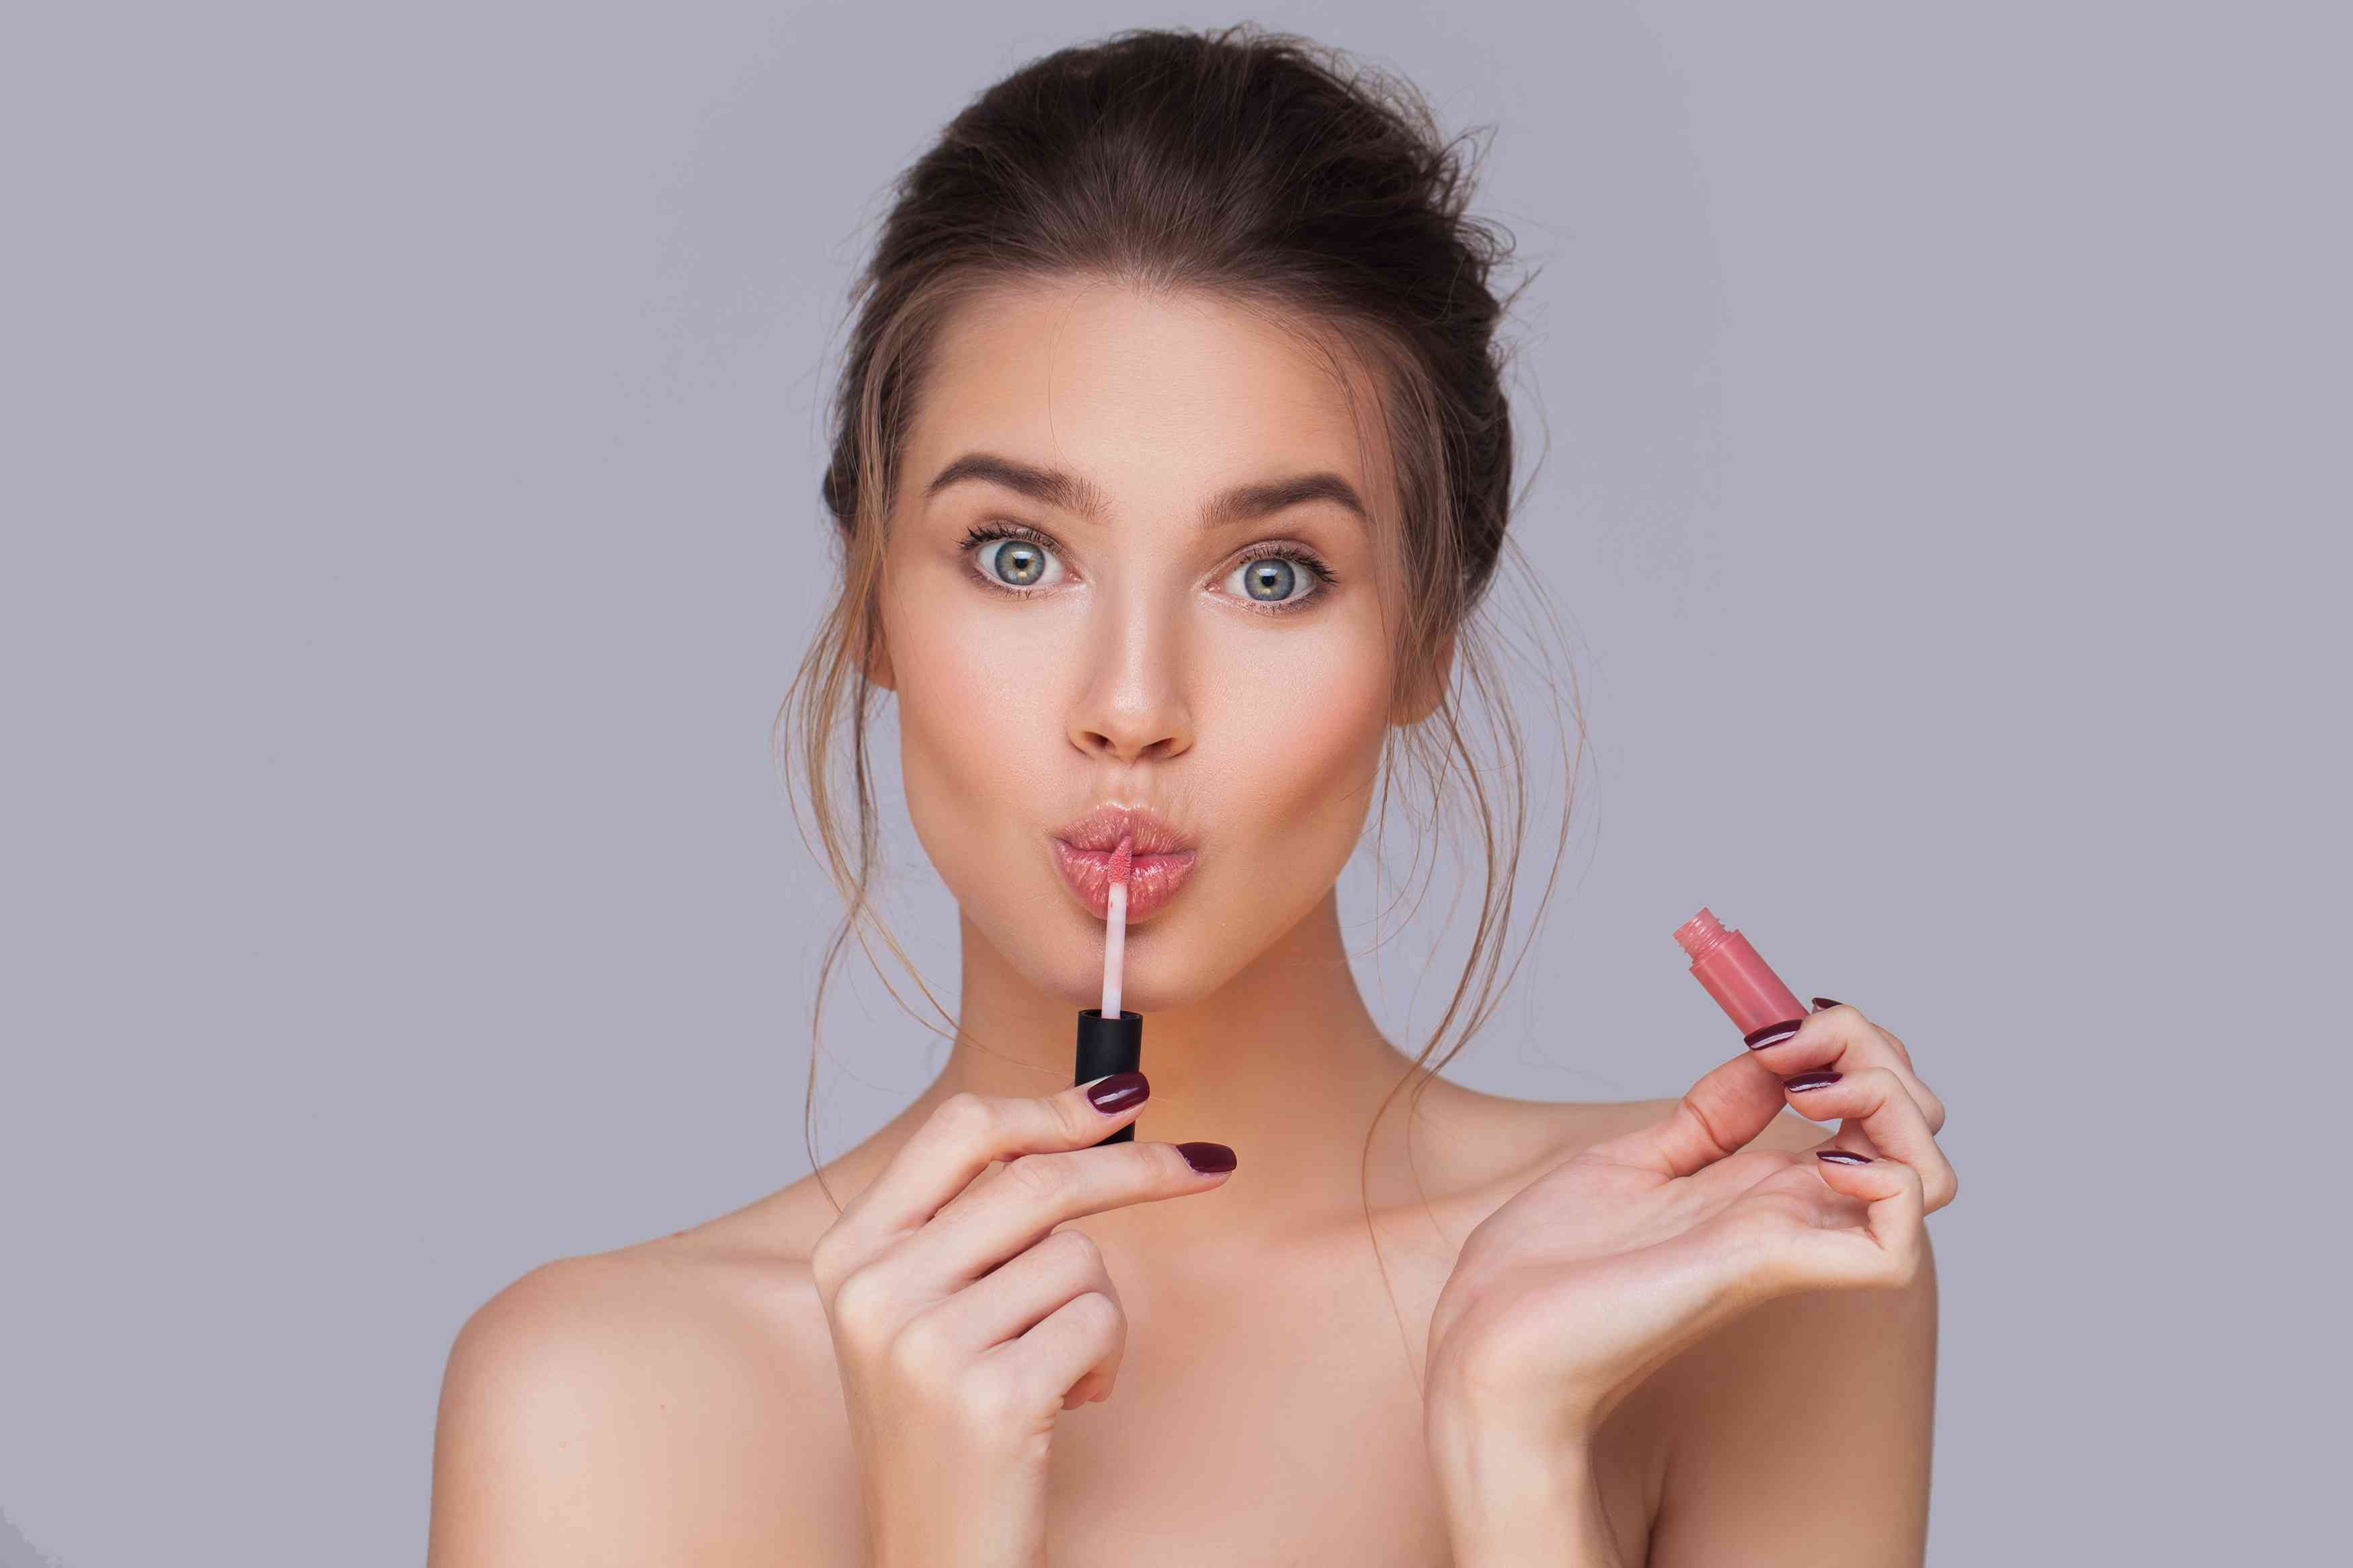 How To Choose The Right Lip-Plumping Gloss For You